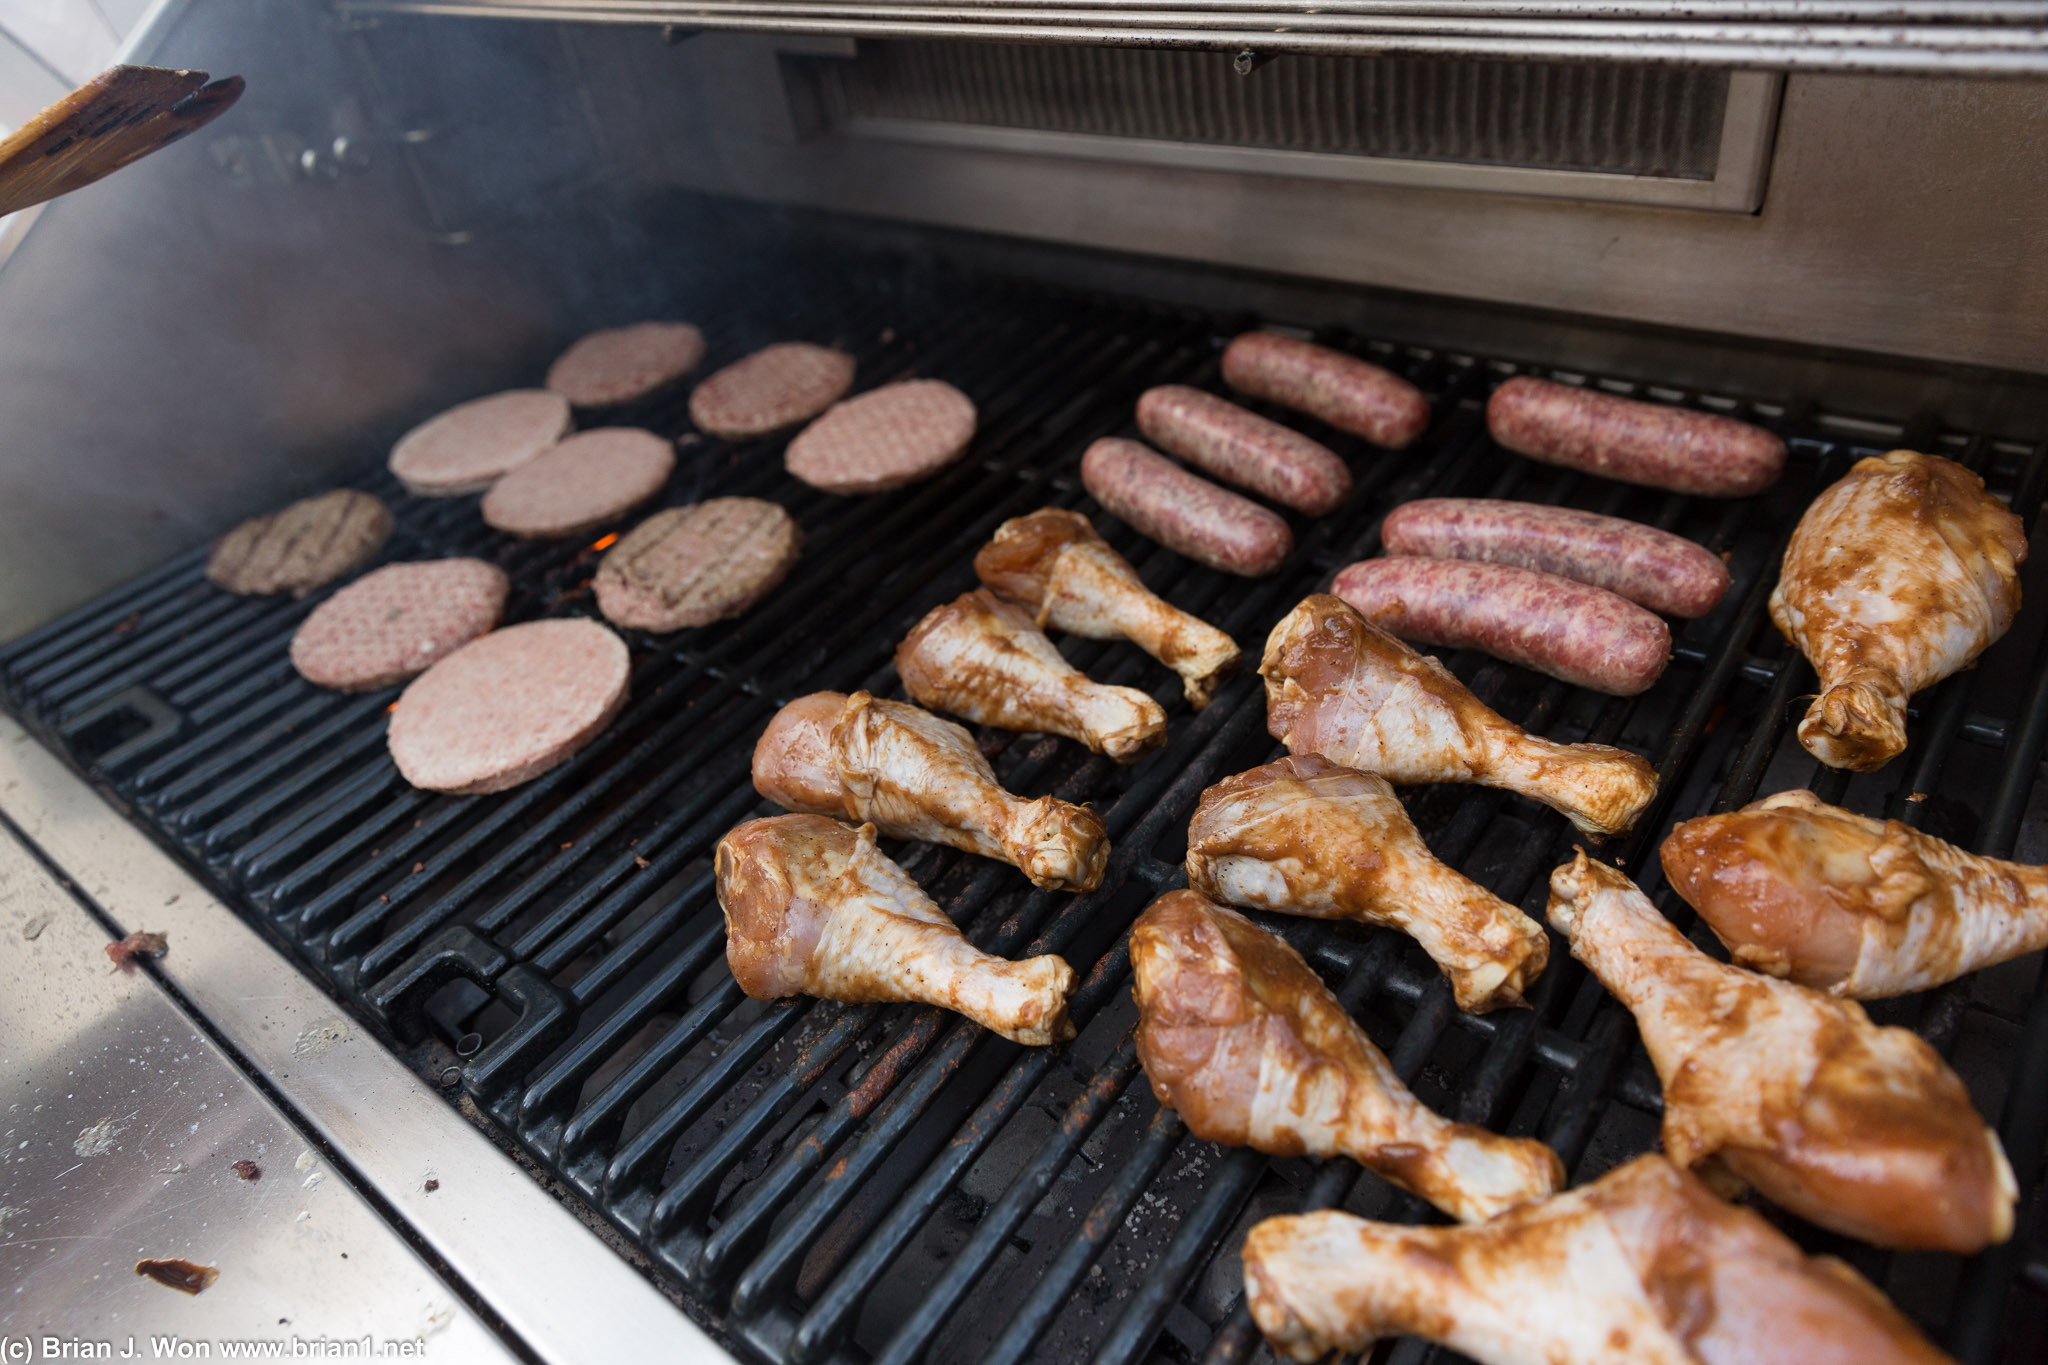 Burgers, brats, and chicken.